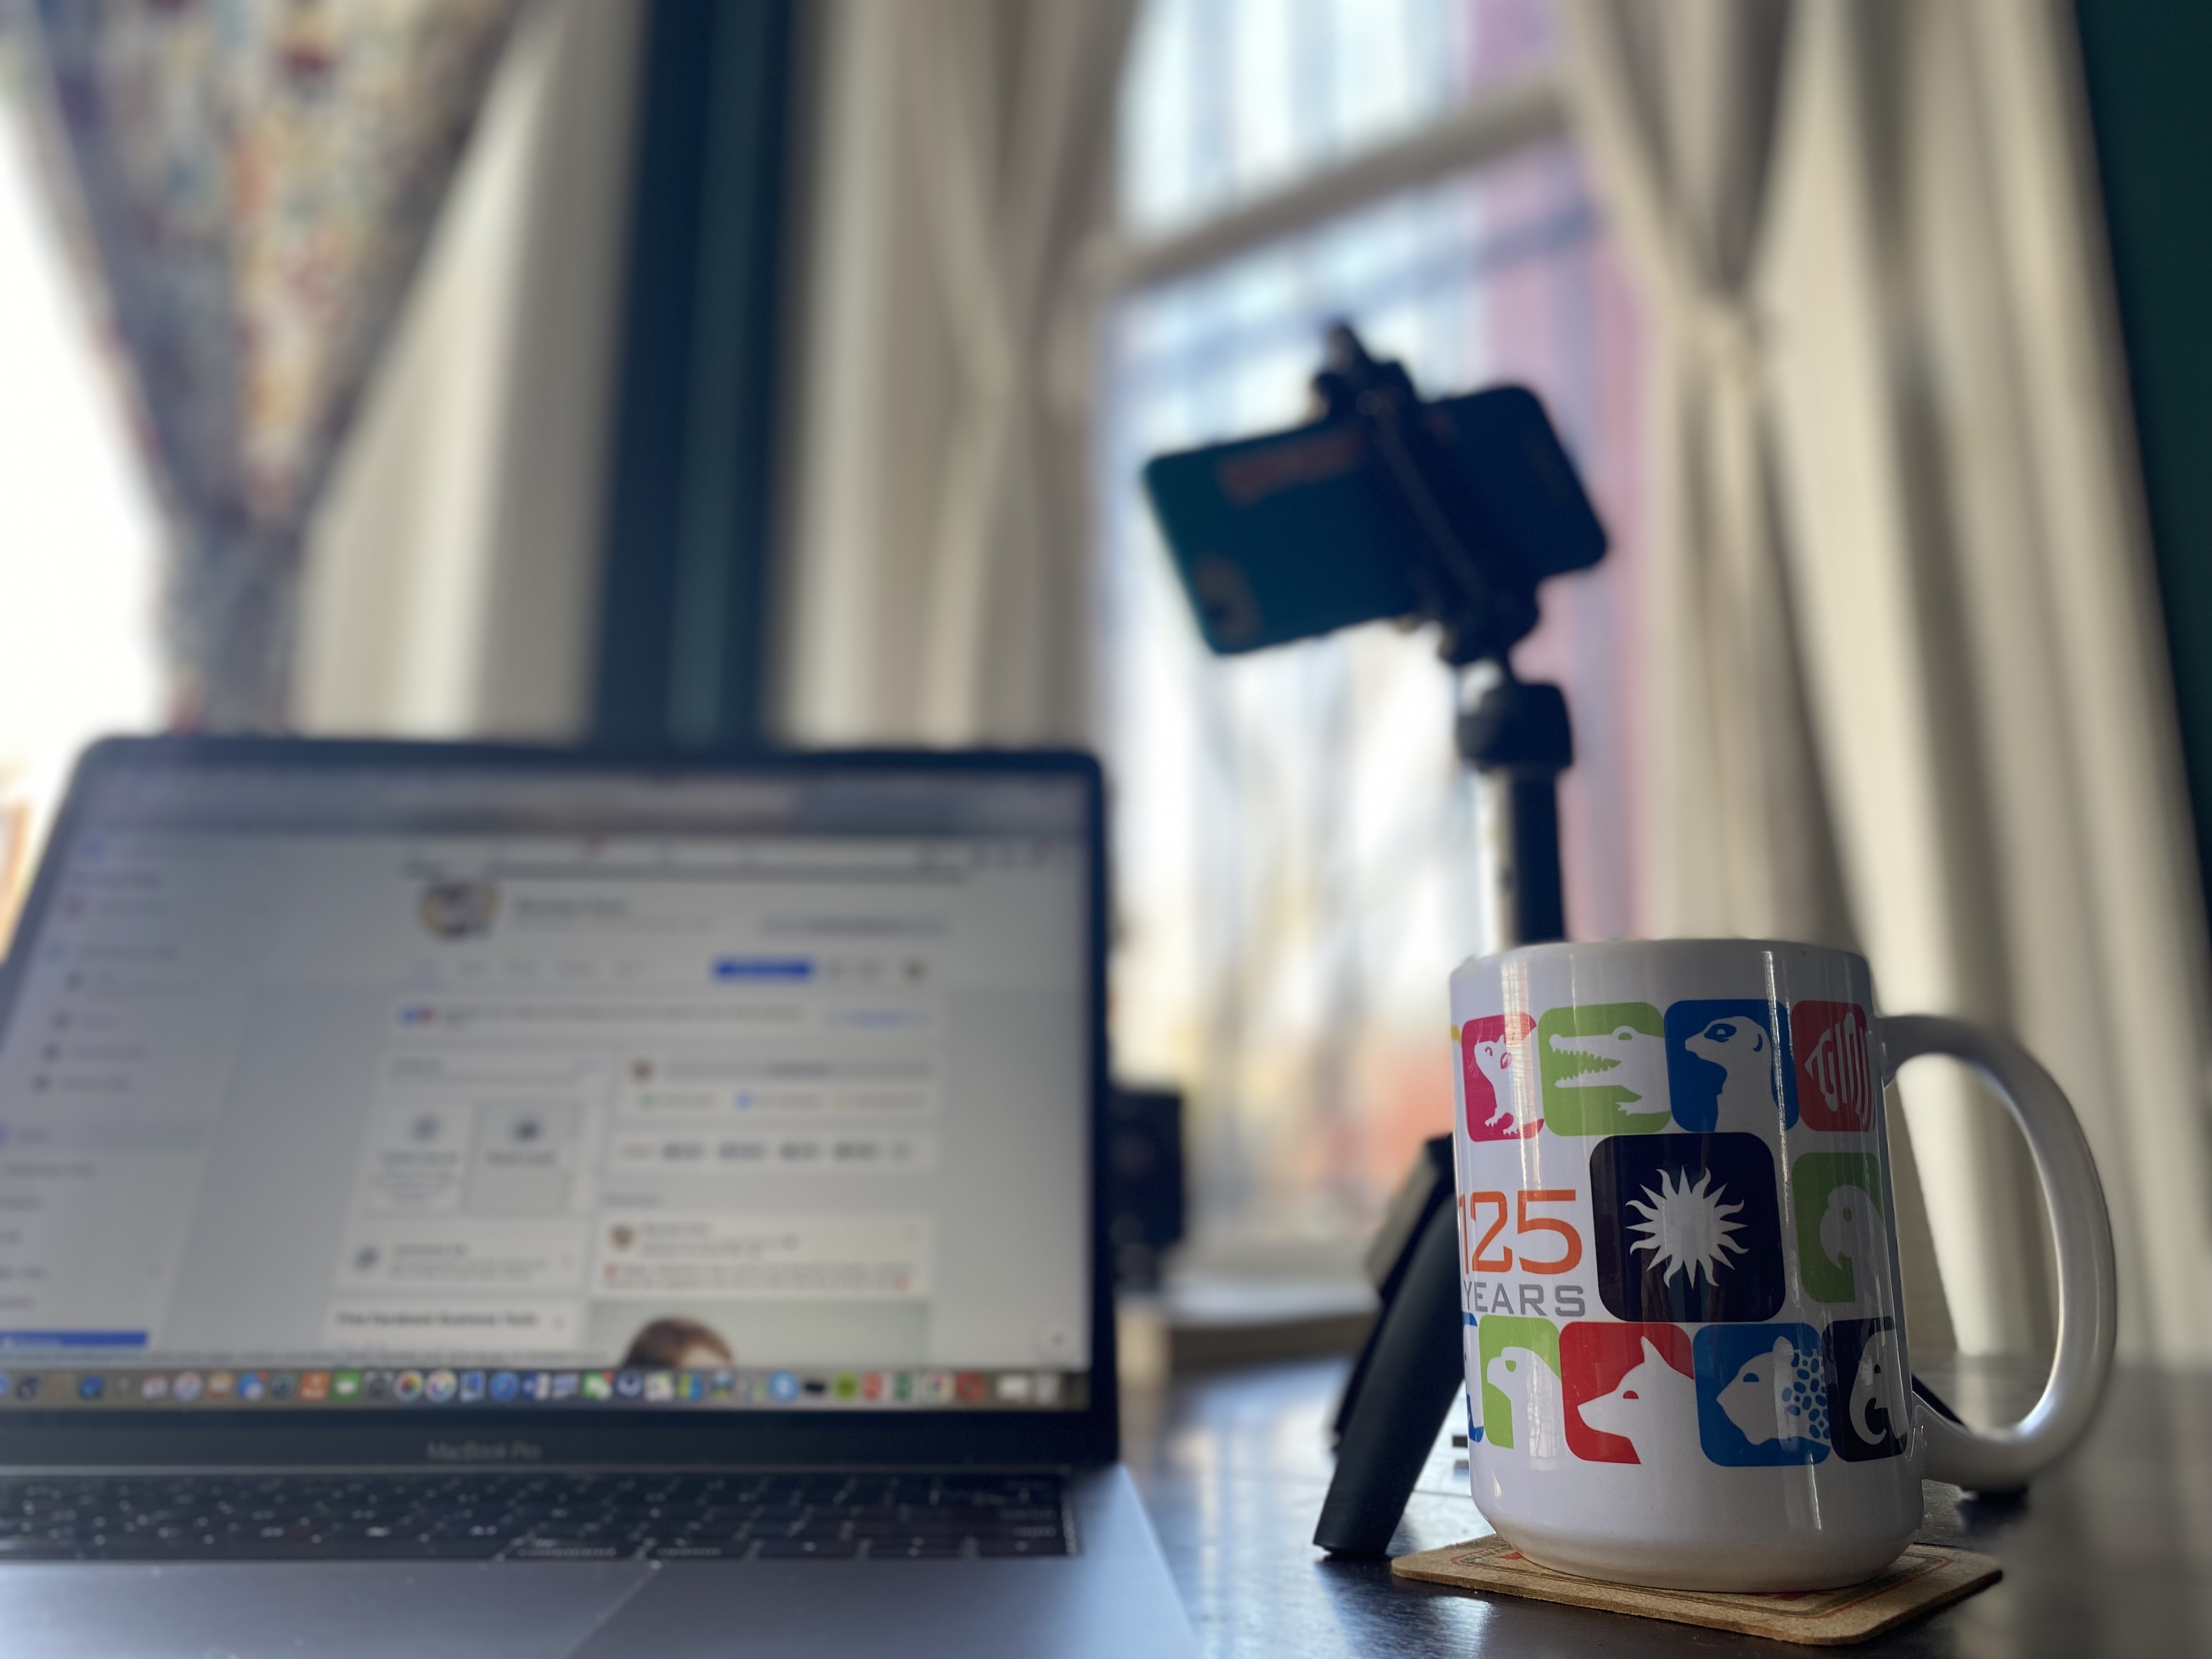 A laptop, tripod with smart phone mounted and coffee cup are pictured before a background of creamy white curtains.